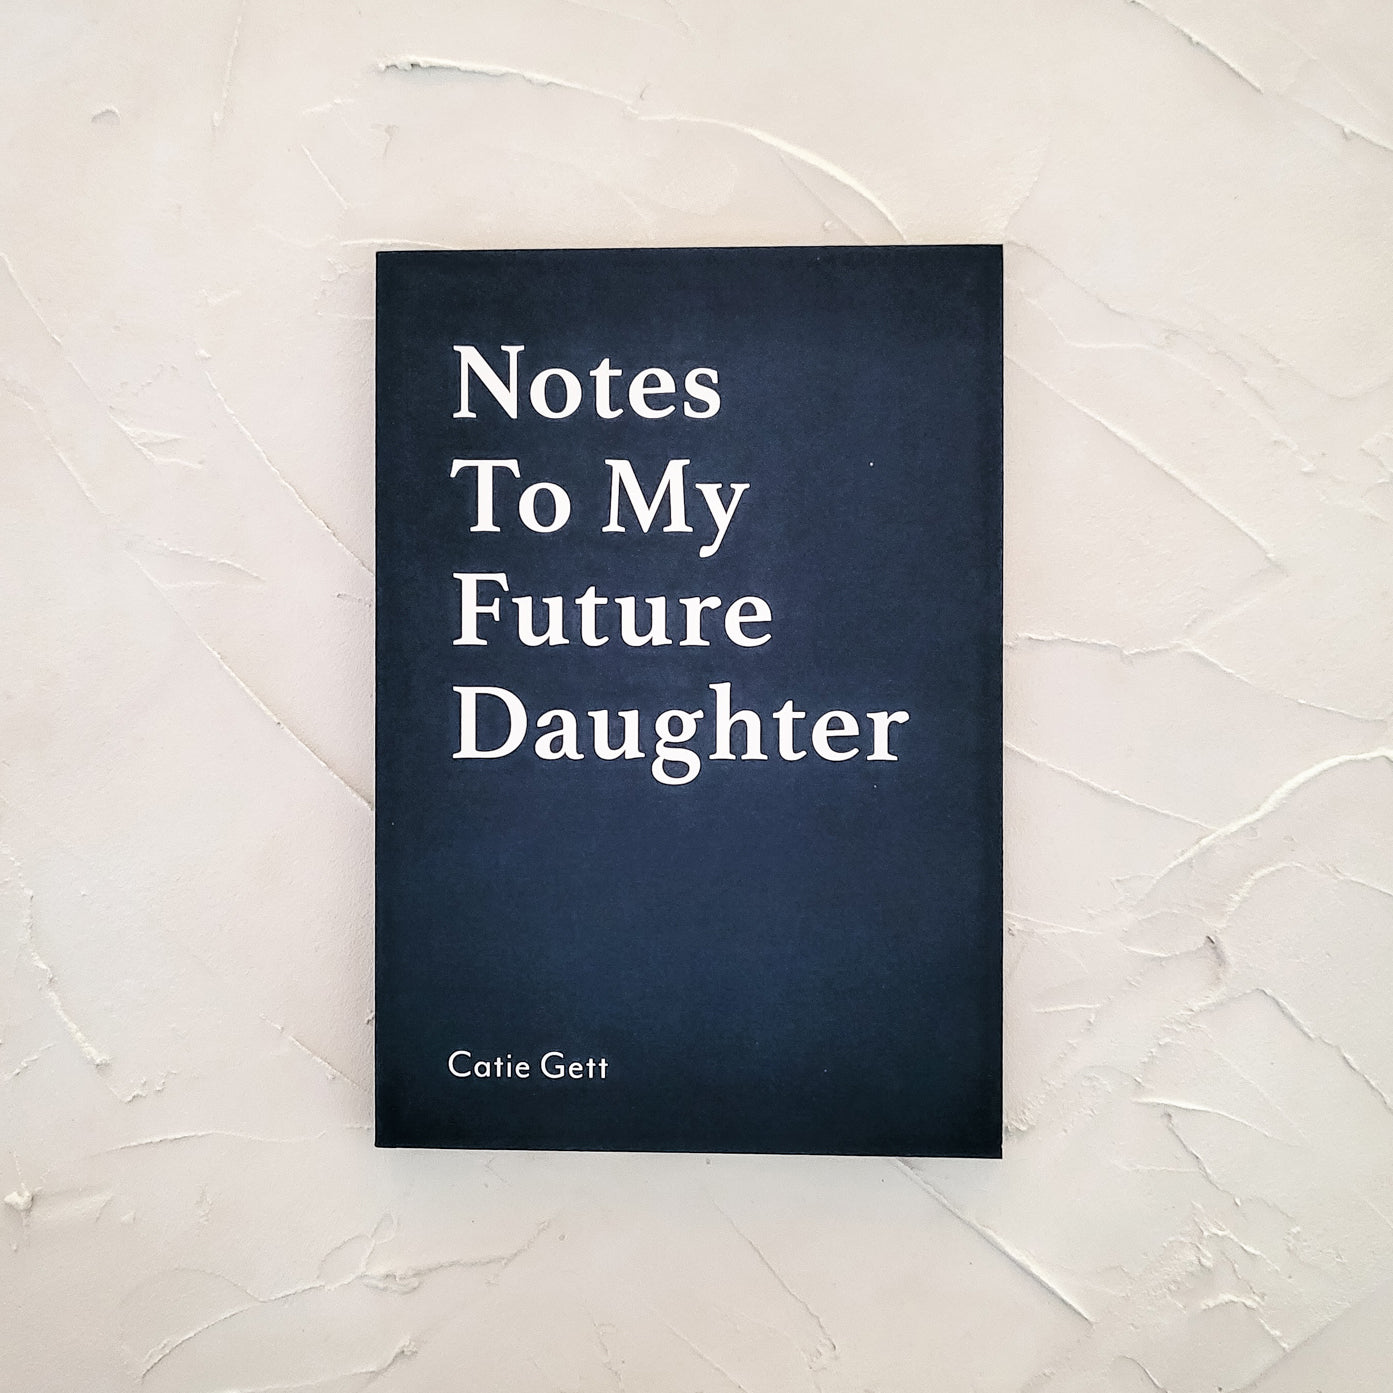 Notes To My Future Daughter cover - Catie Gett